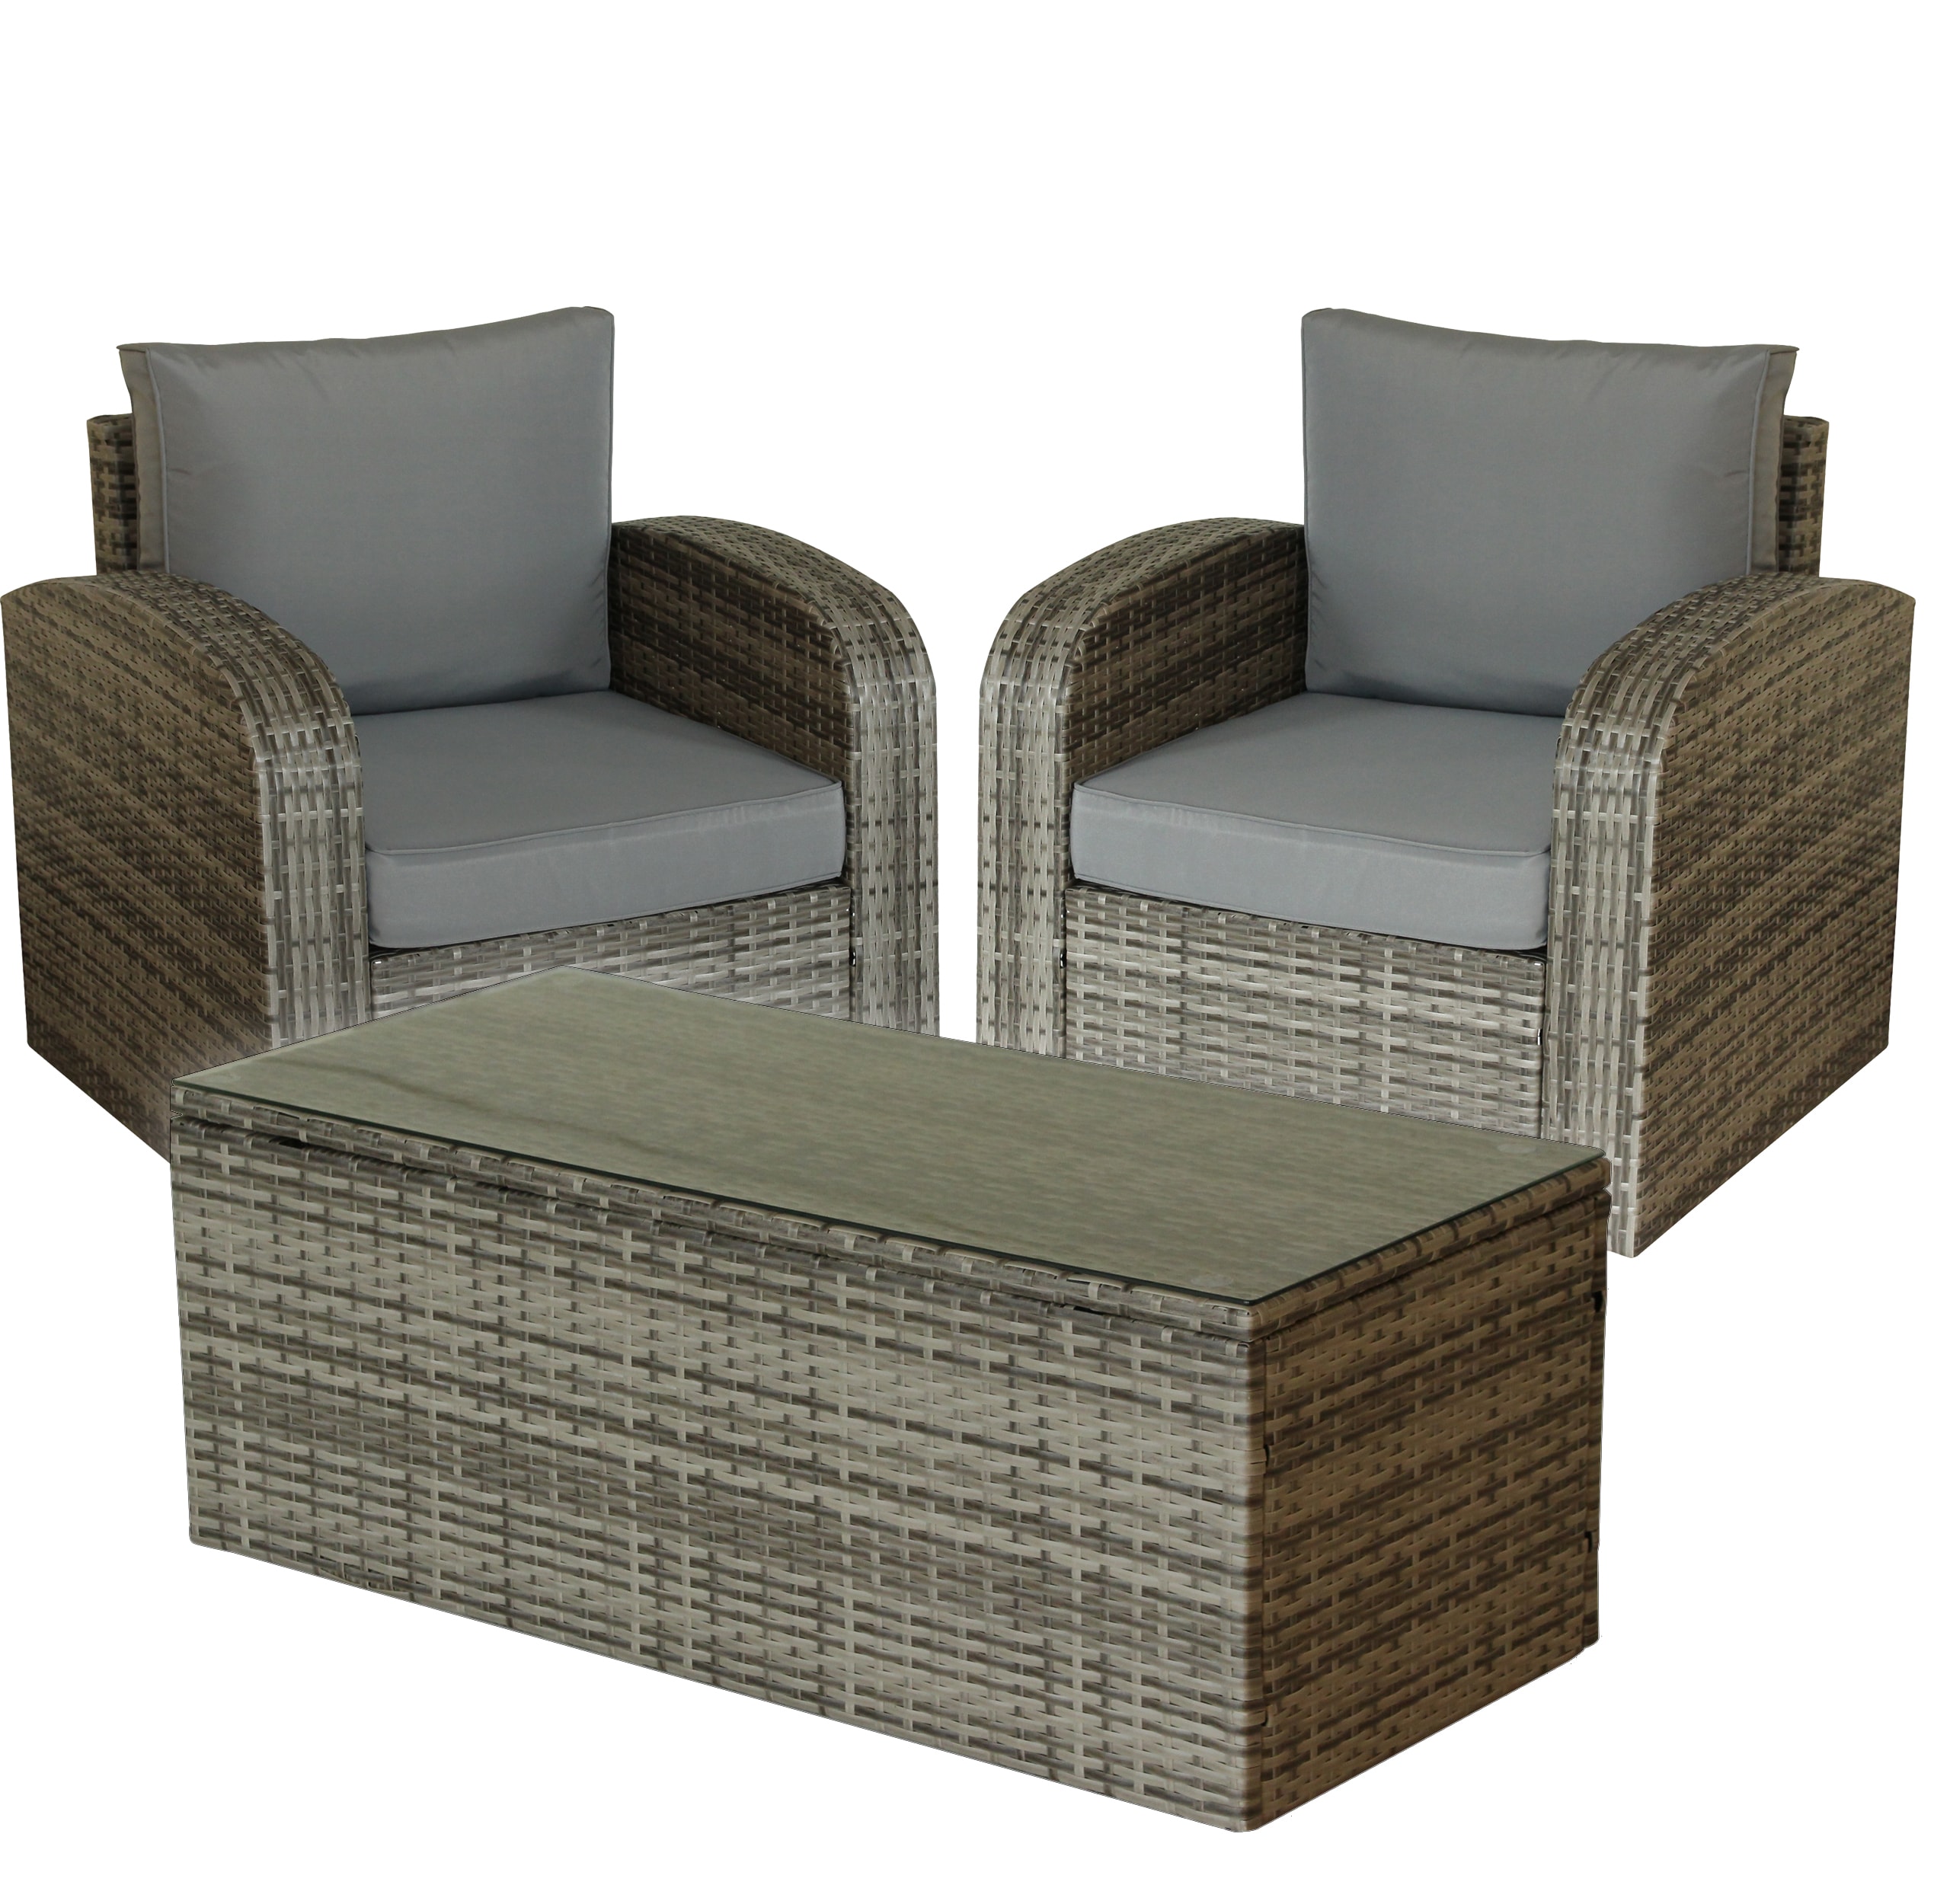 Luxury Living Furniture 3 Piece Wicker Rattan Outdoor Lounge Set at ...